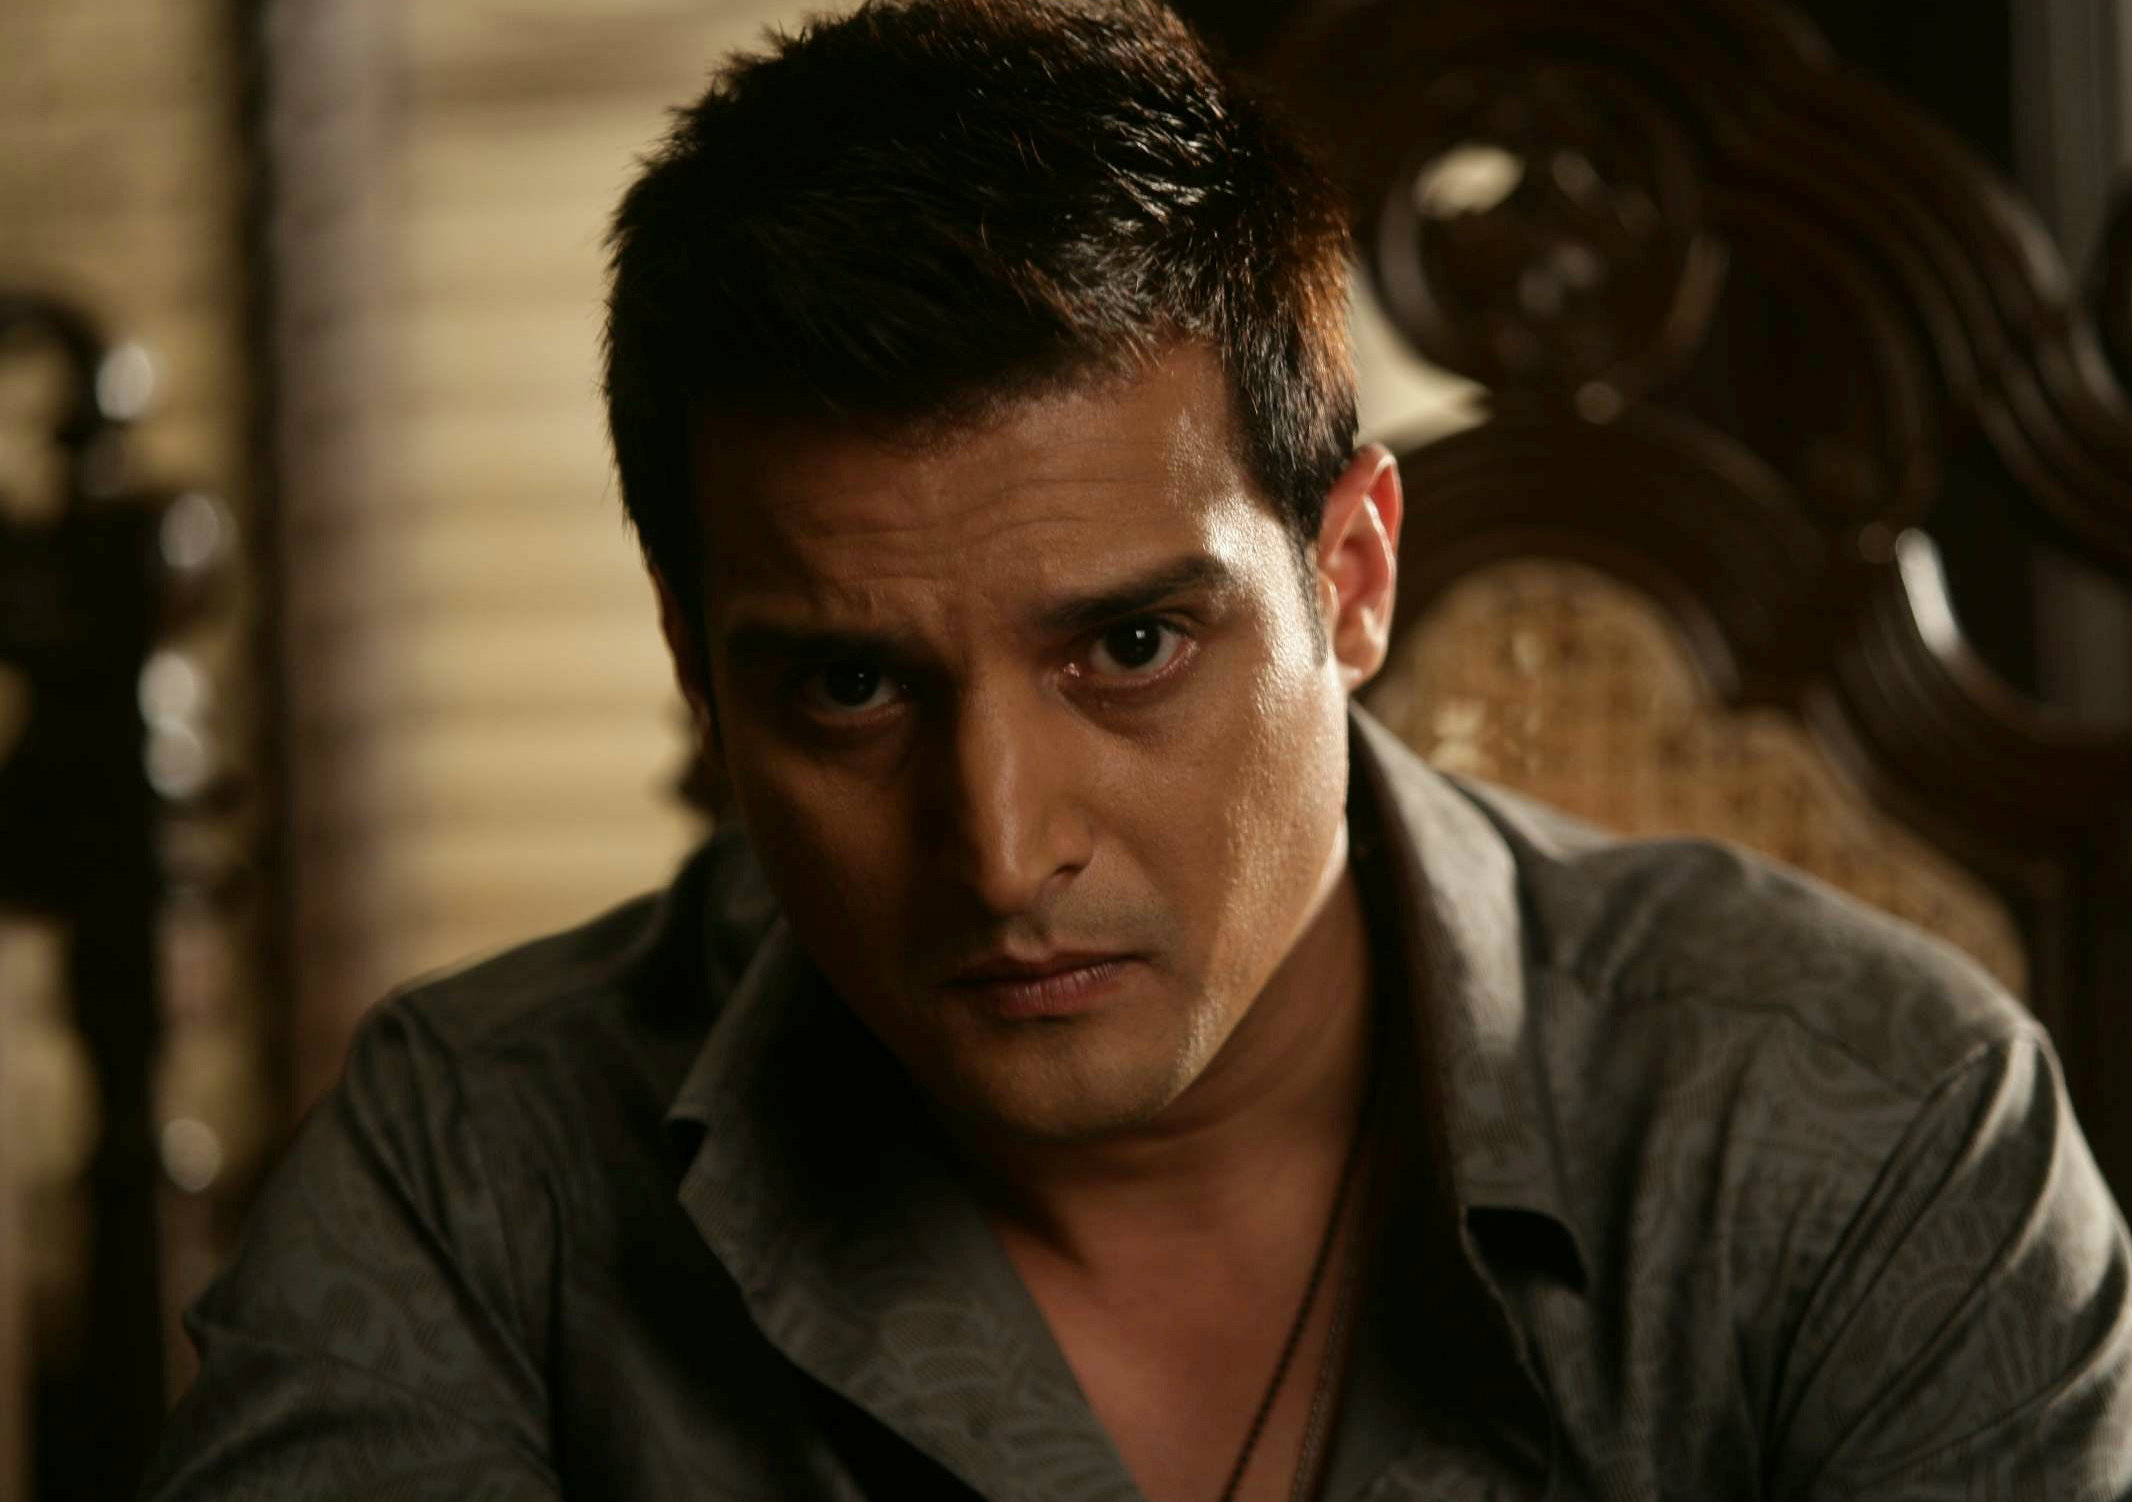 Jimmy Sheirgill: Children's films not given encouragement in industry